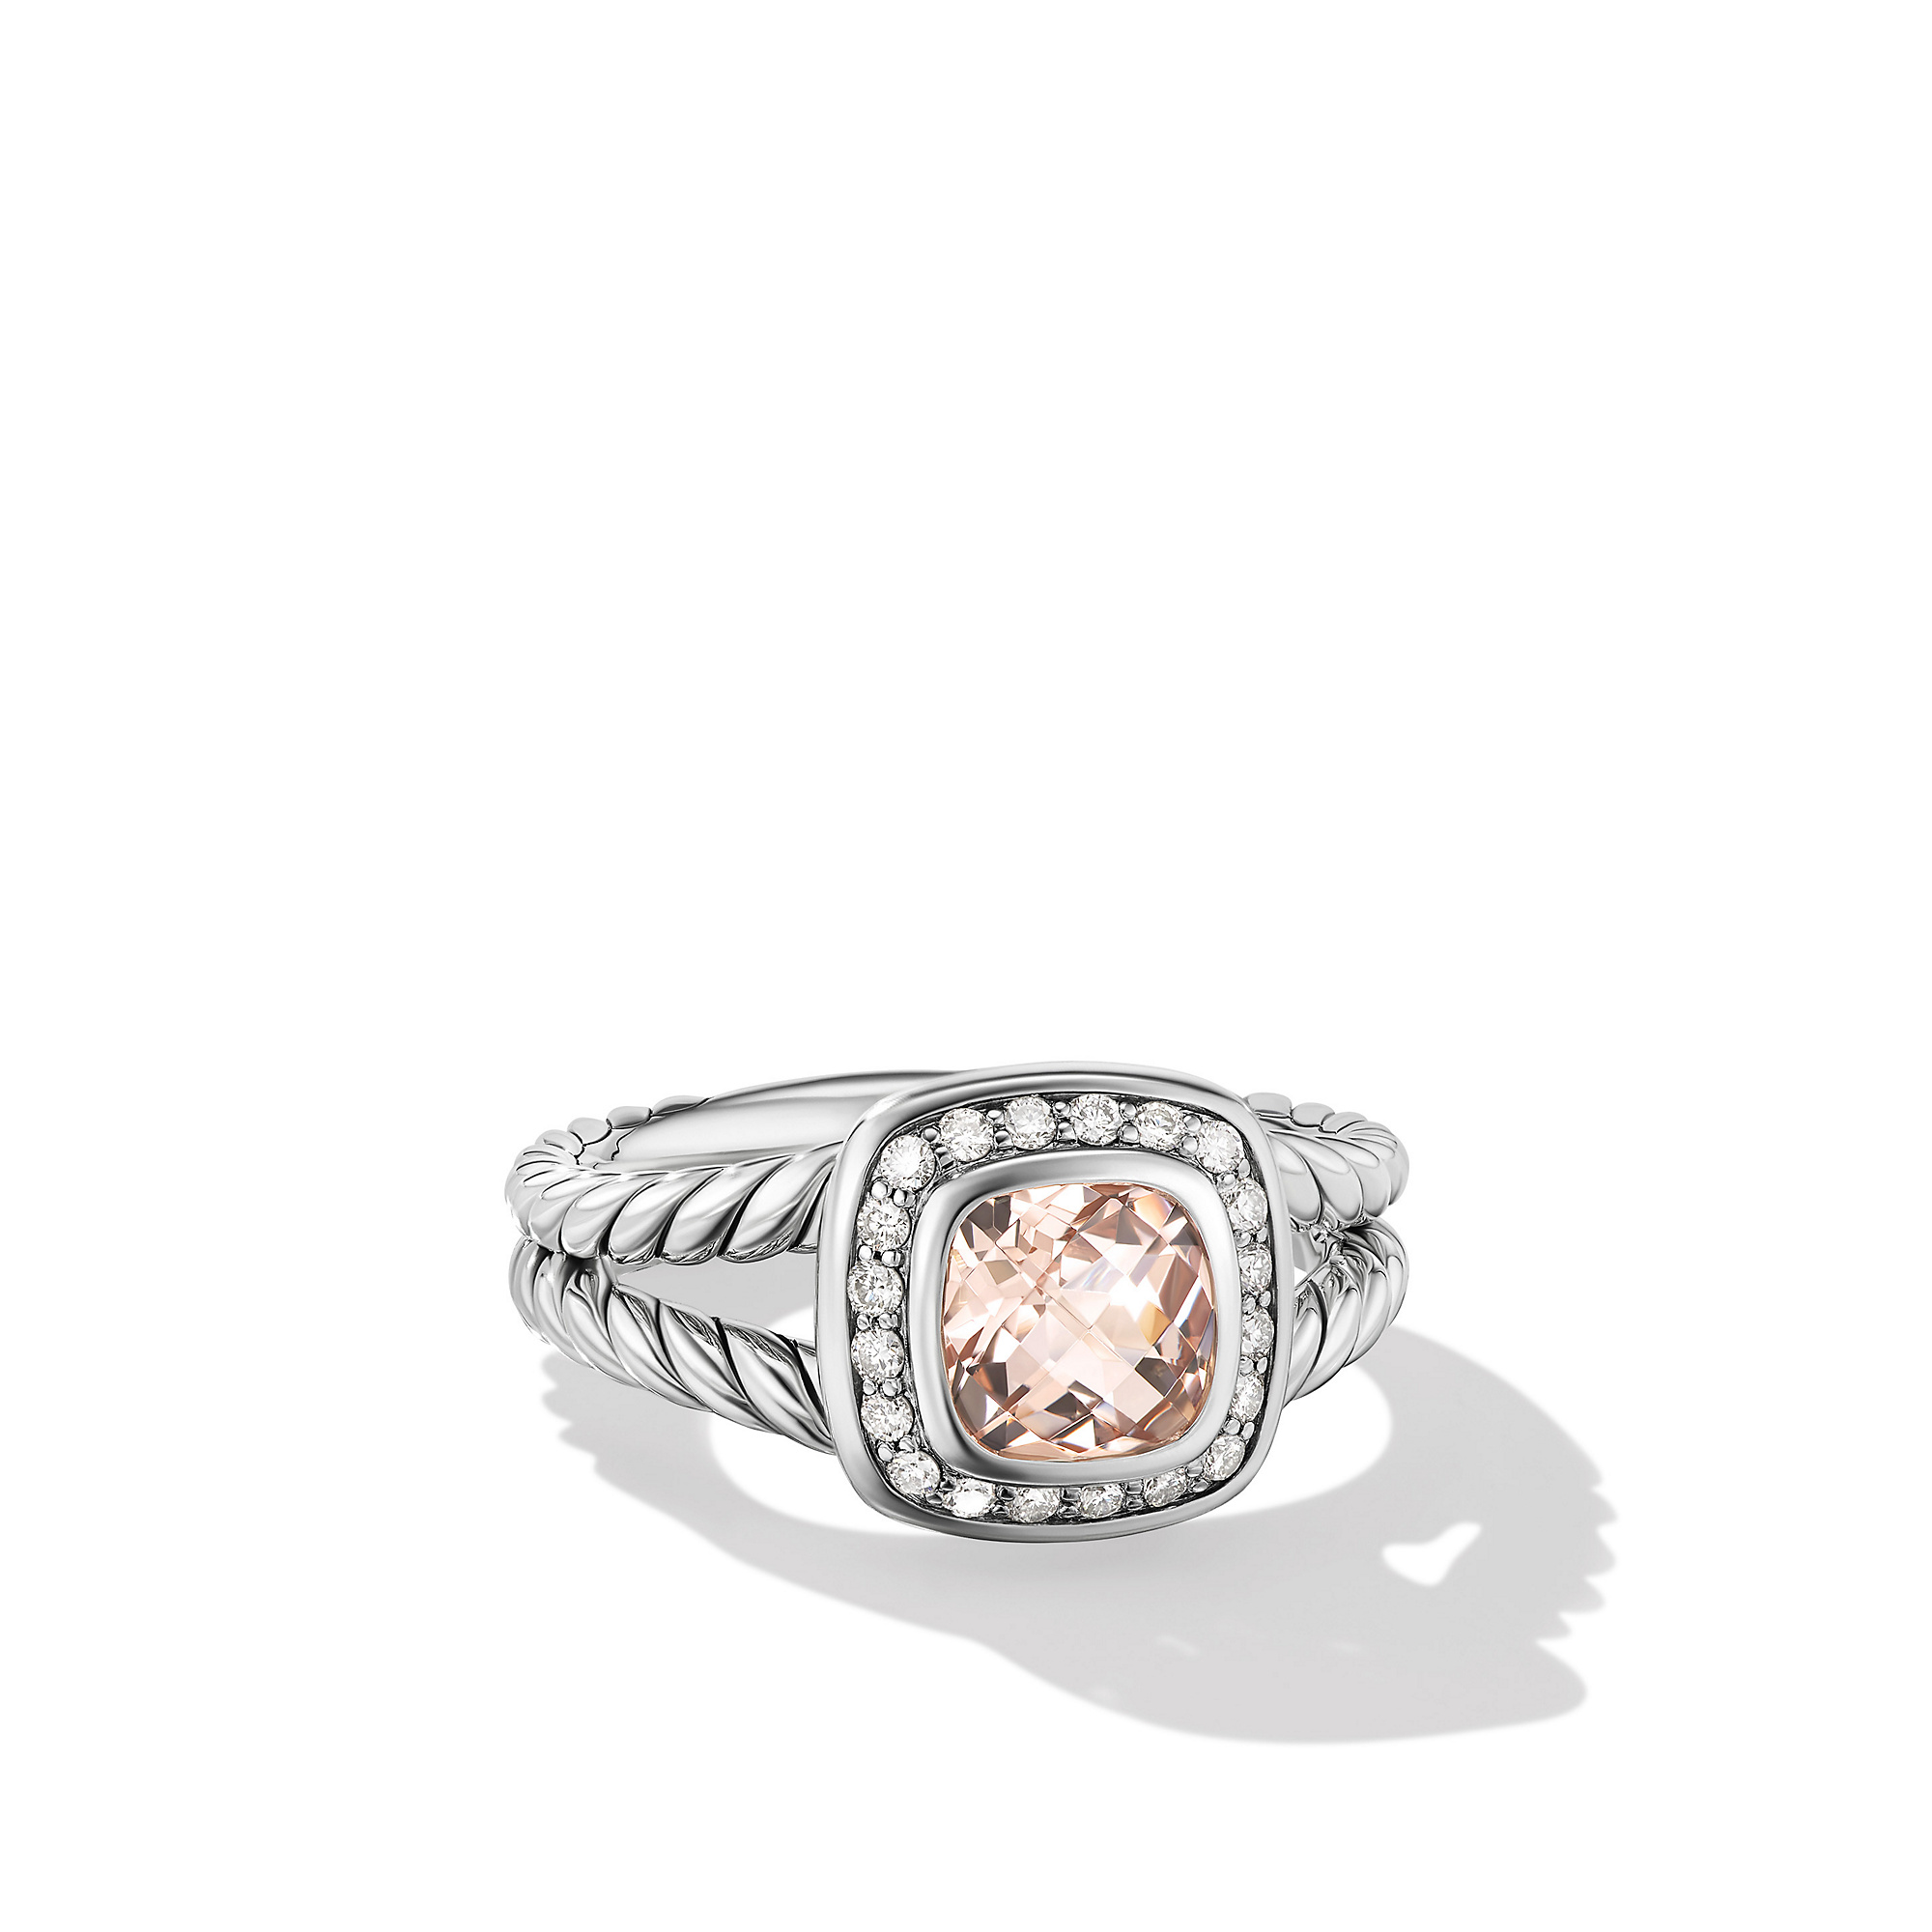 Petite Albion® Ring in Sterling Silver with Morganite and Pave Diamonds